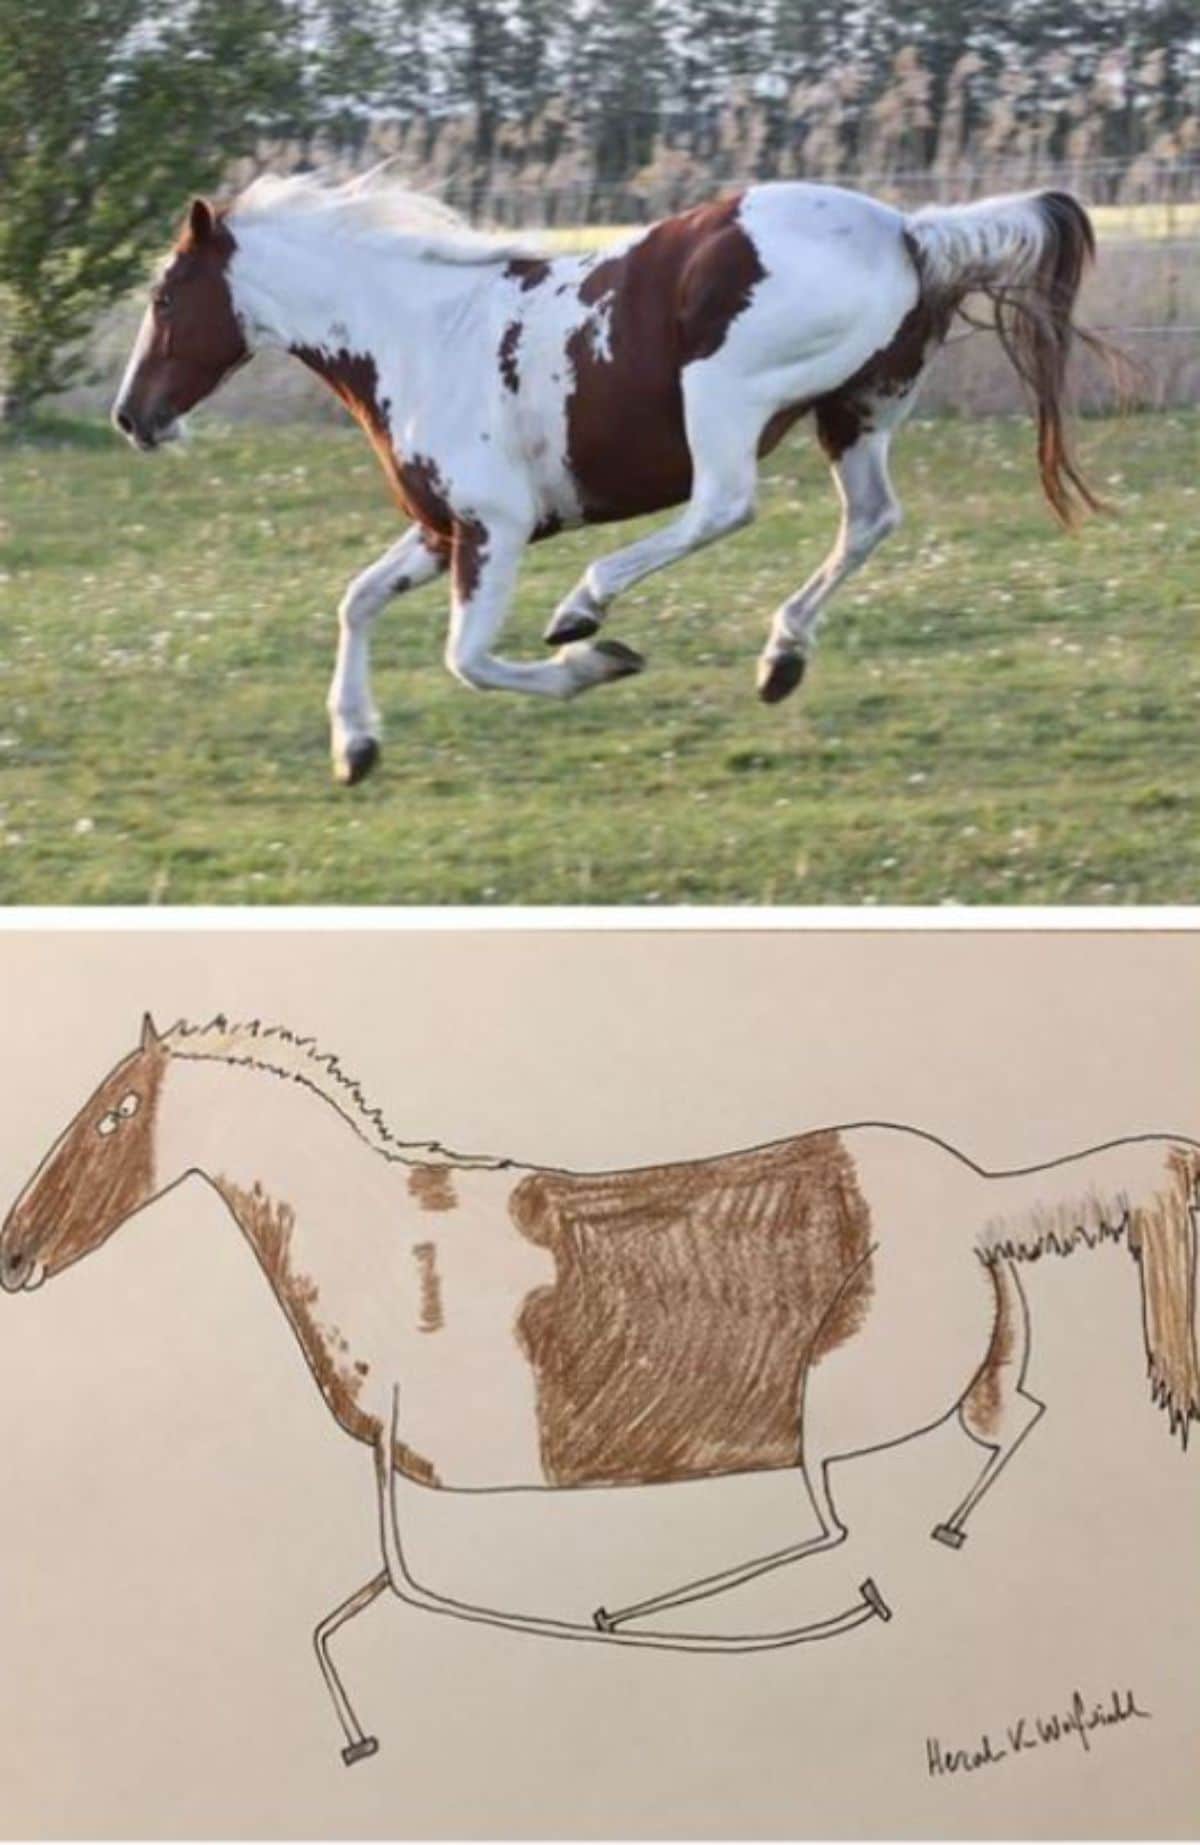 2 photo and cartoon images of a brown and white horse running